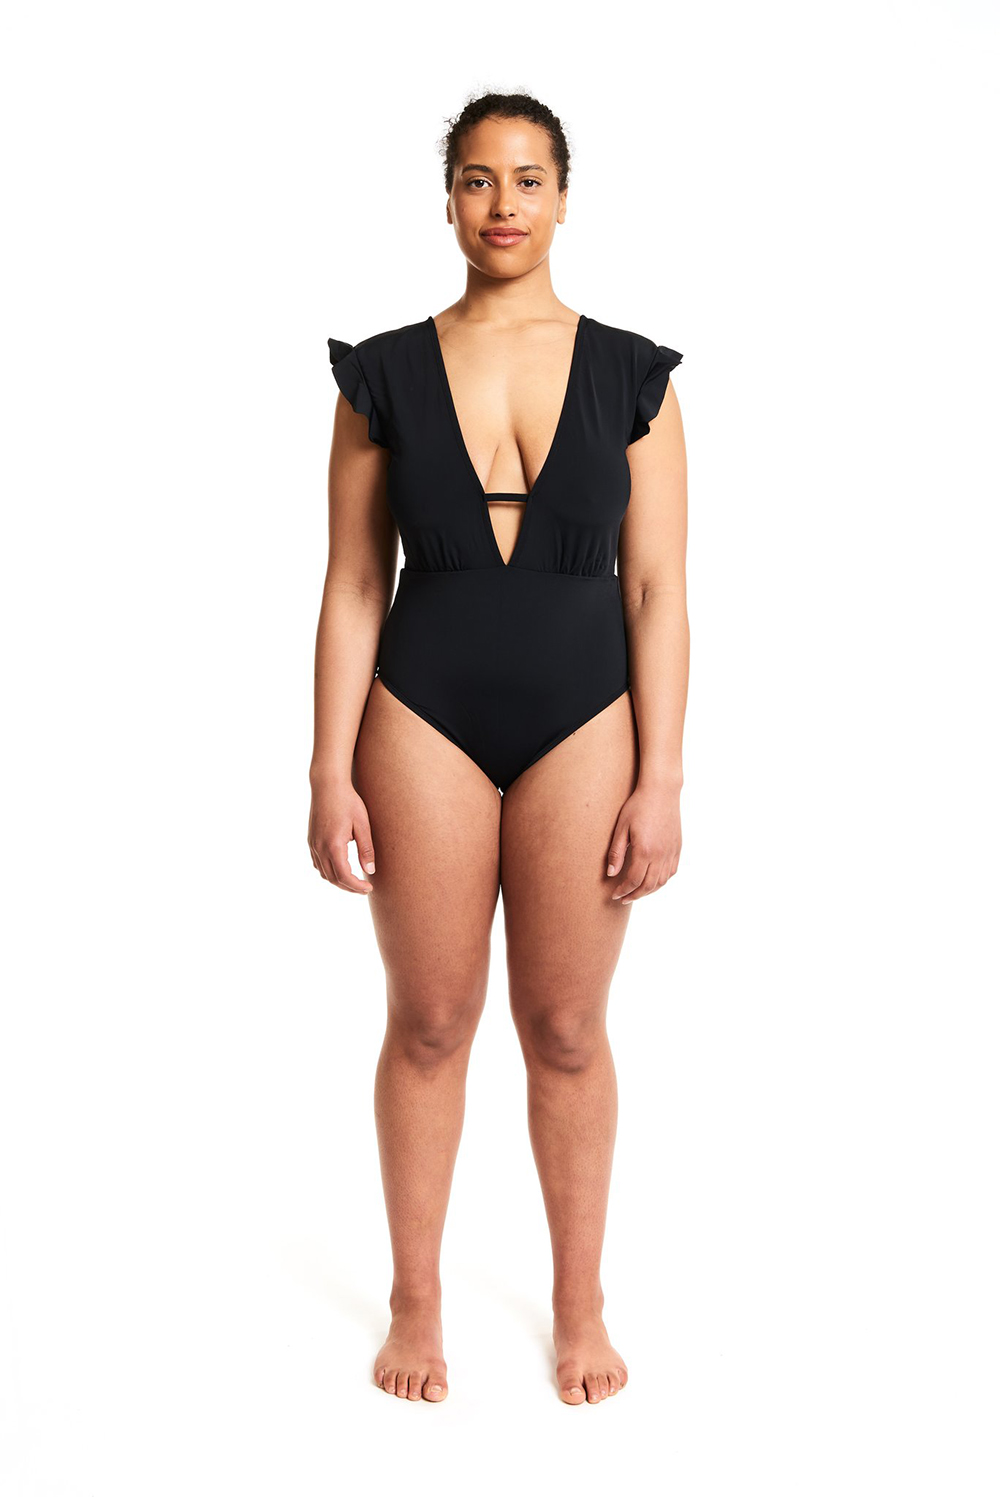 A model wearing a black fluttery one-piece swimsuit from Beth Richards.